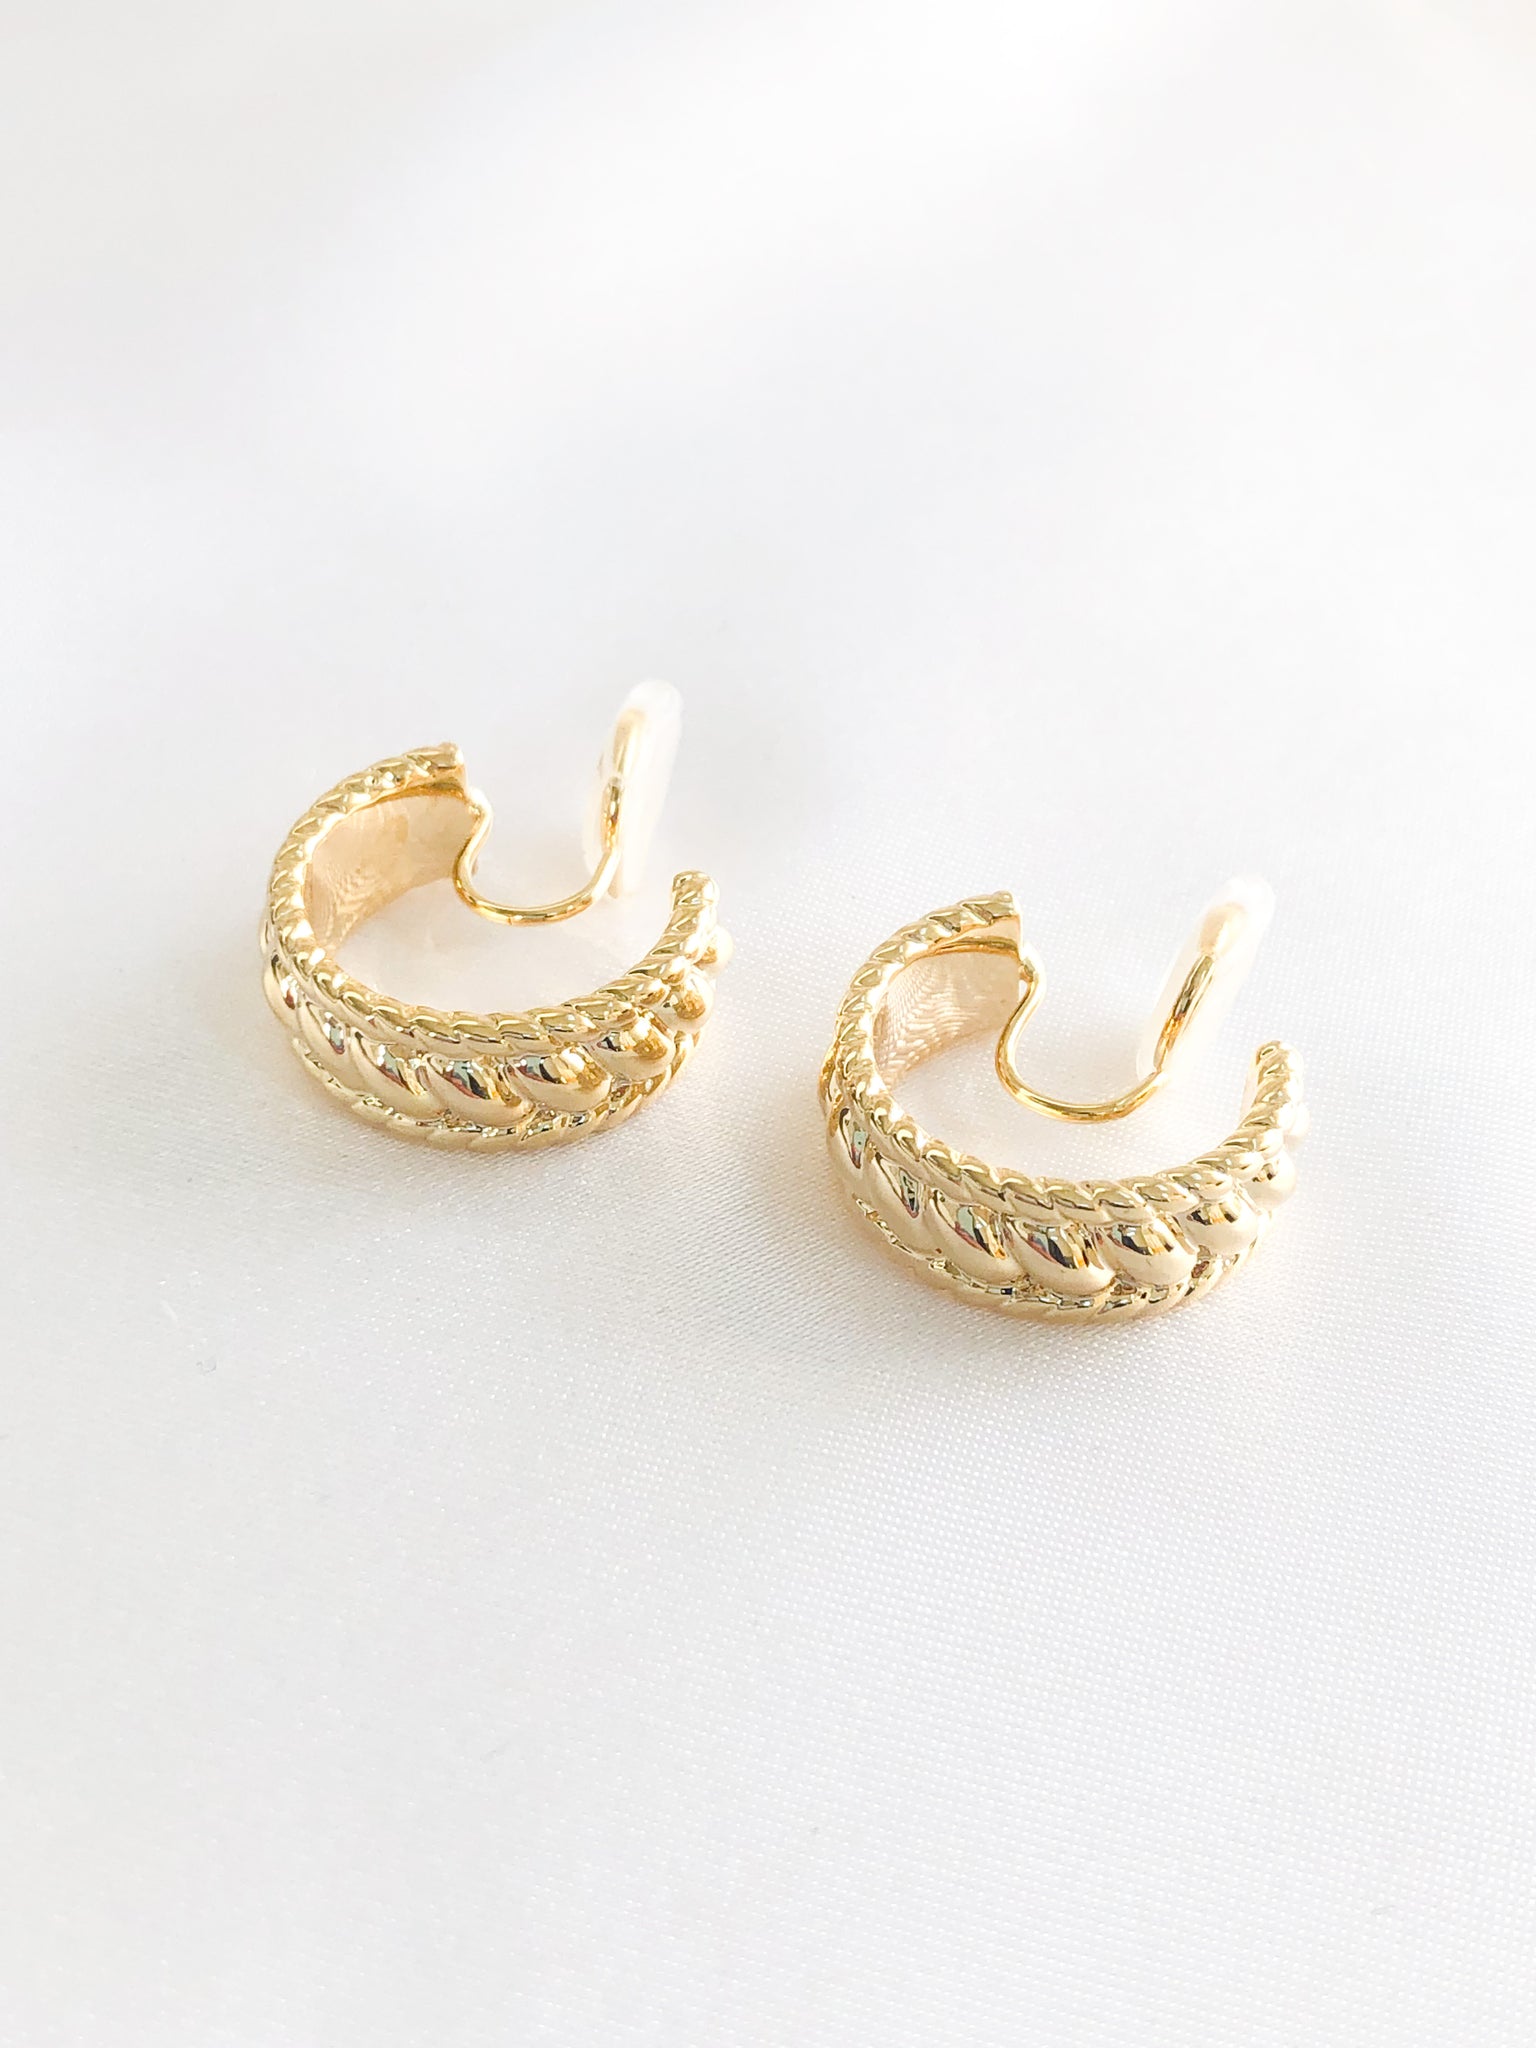 Gold Braided Earrings for a Bold and Textured Look